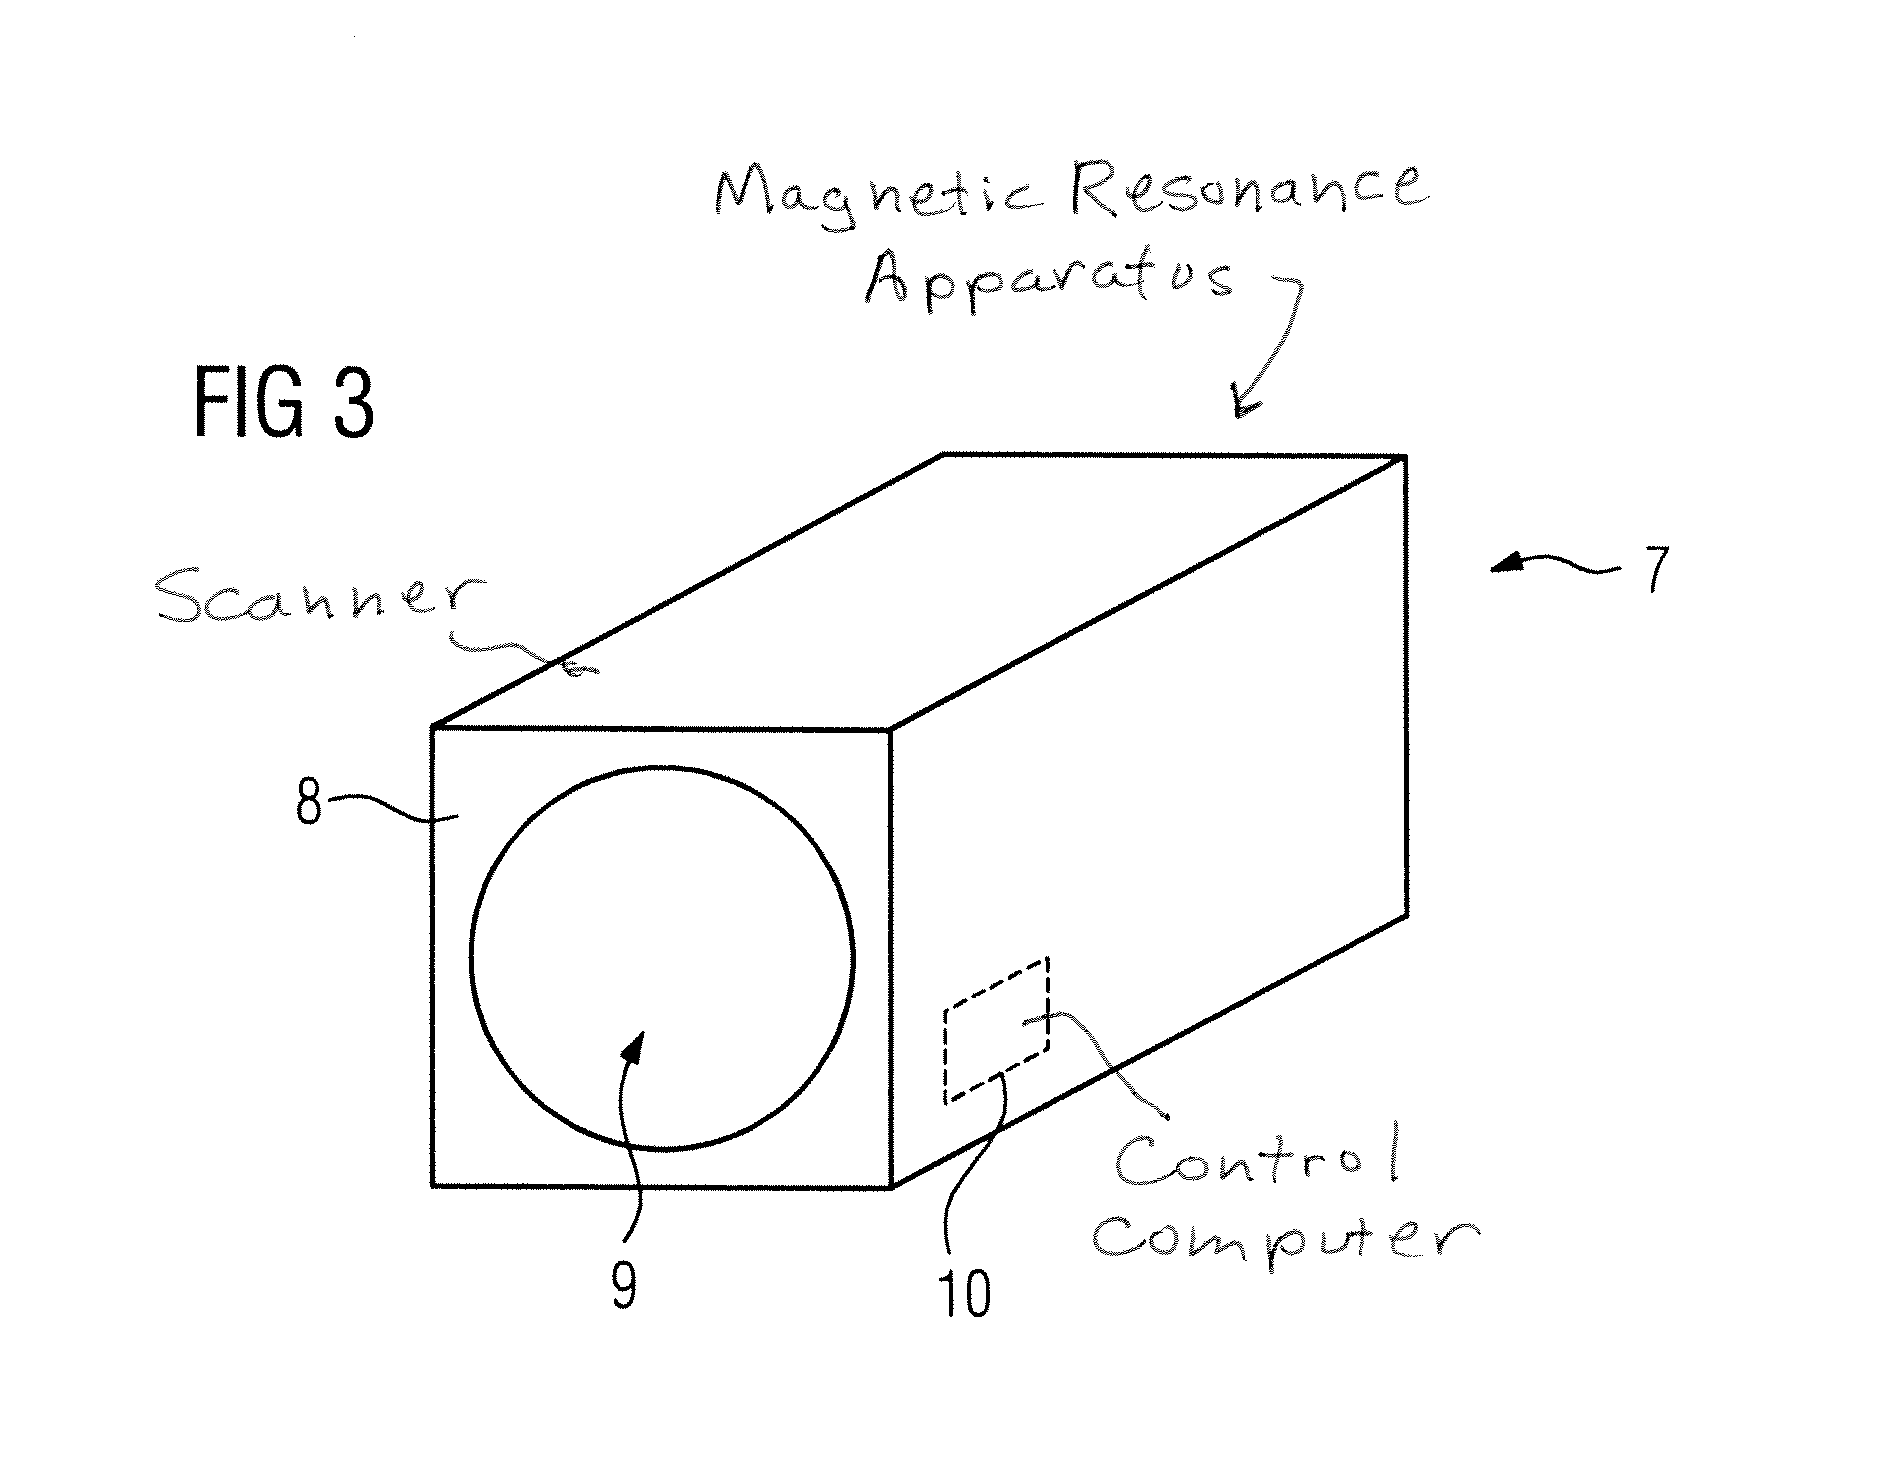 Method and apparatus for acquiring magnetic resonance data from a target region while the target region moves due to respiration